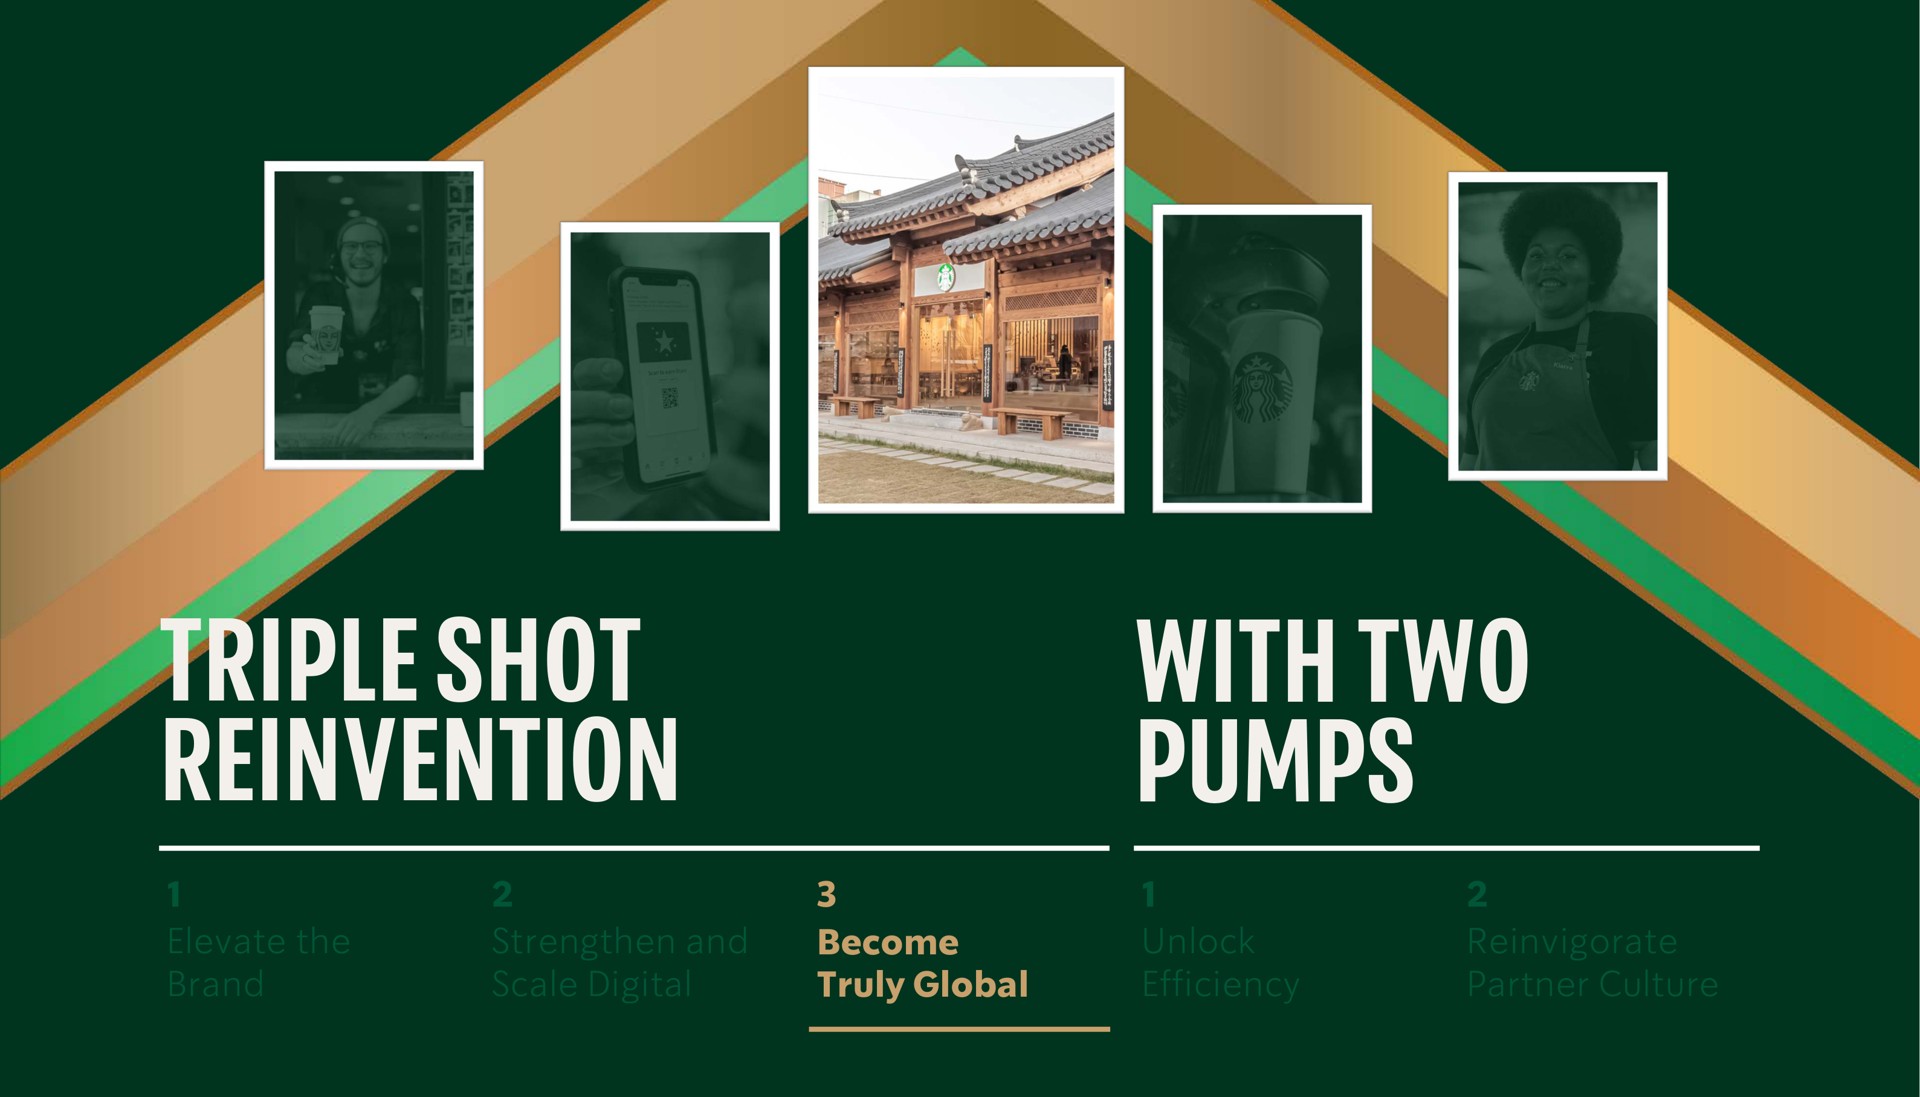 triple shot reinvention with two pumps ses us | Starbucks